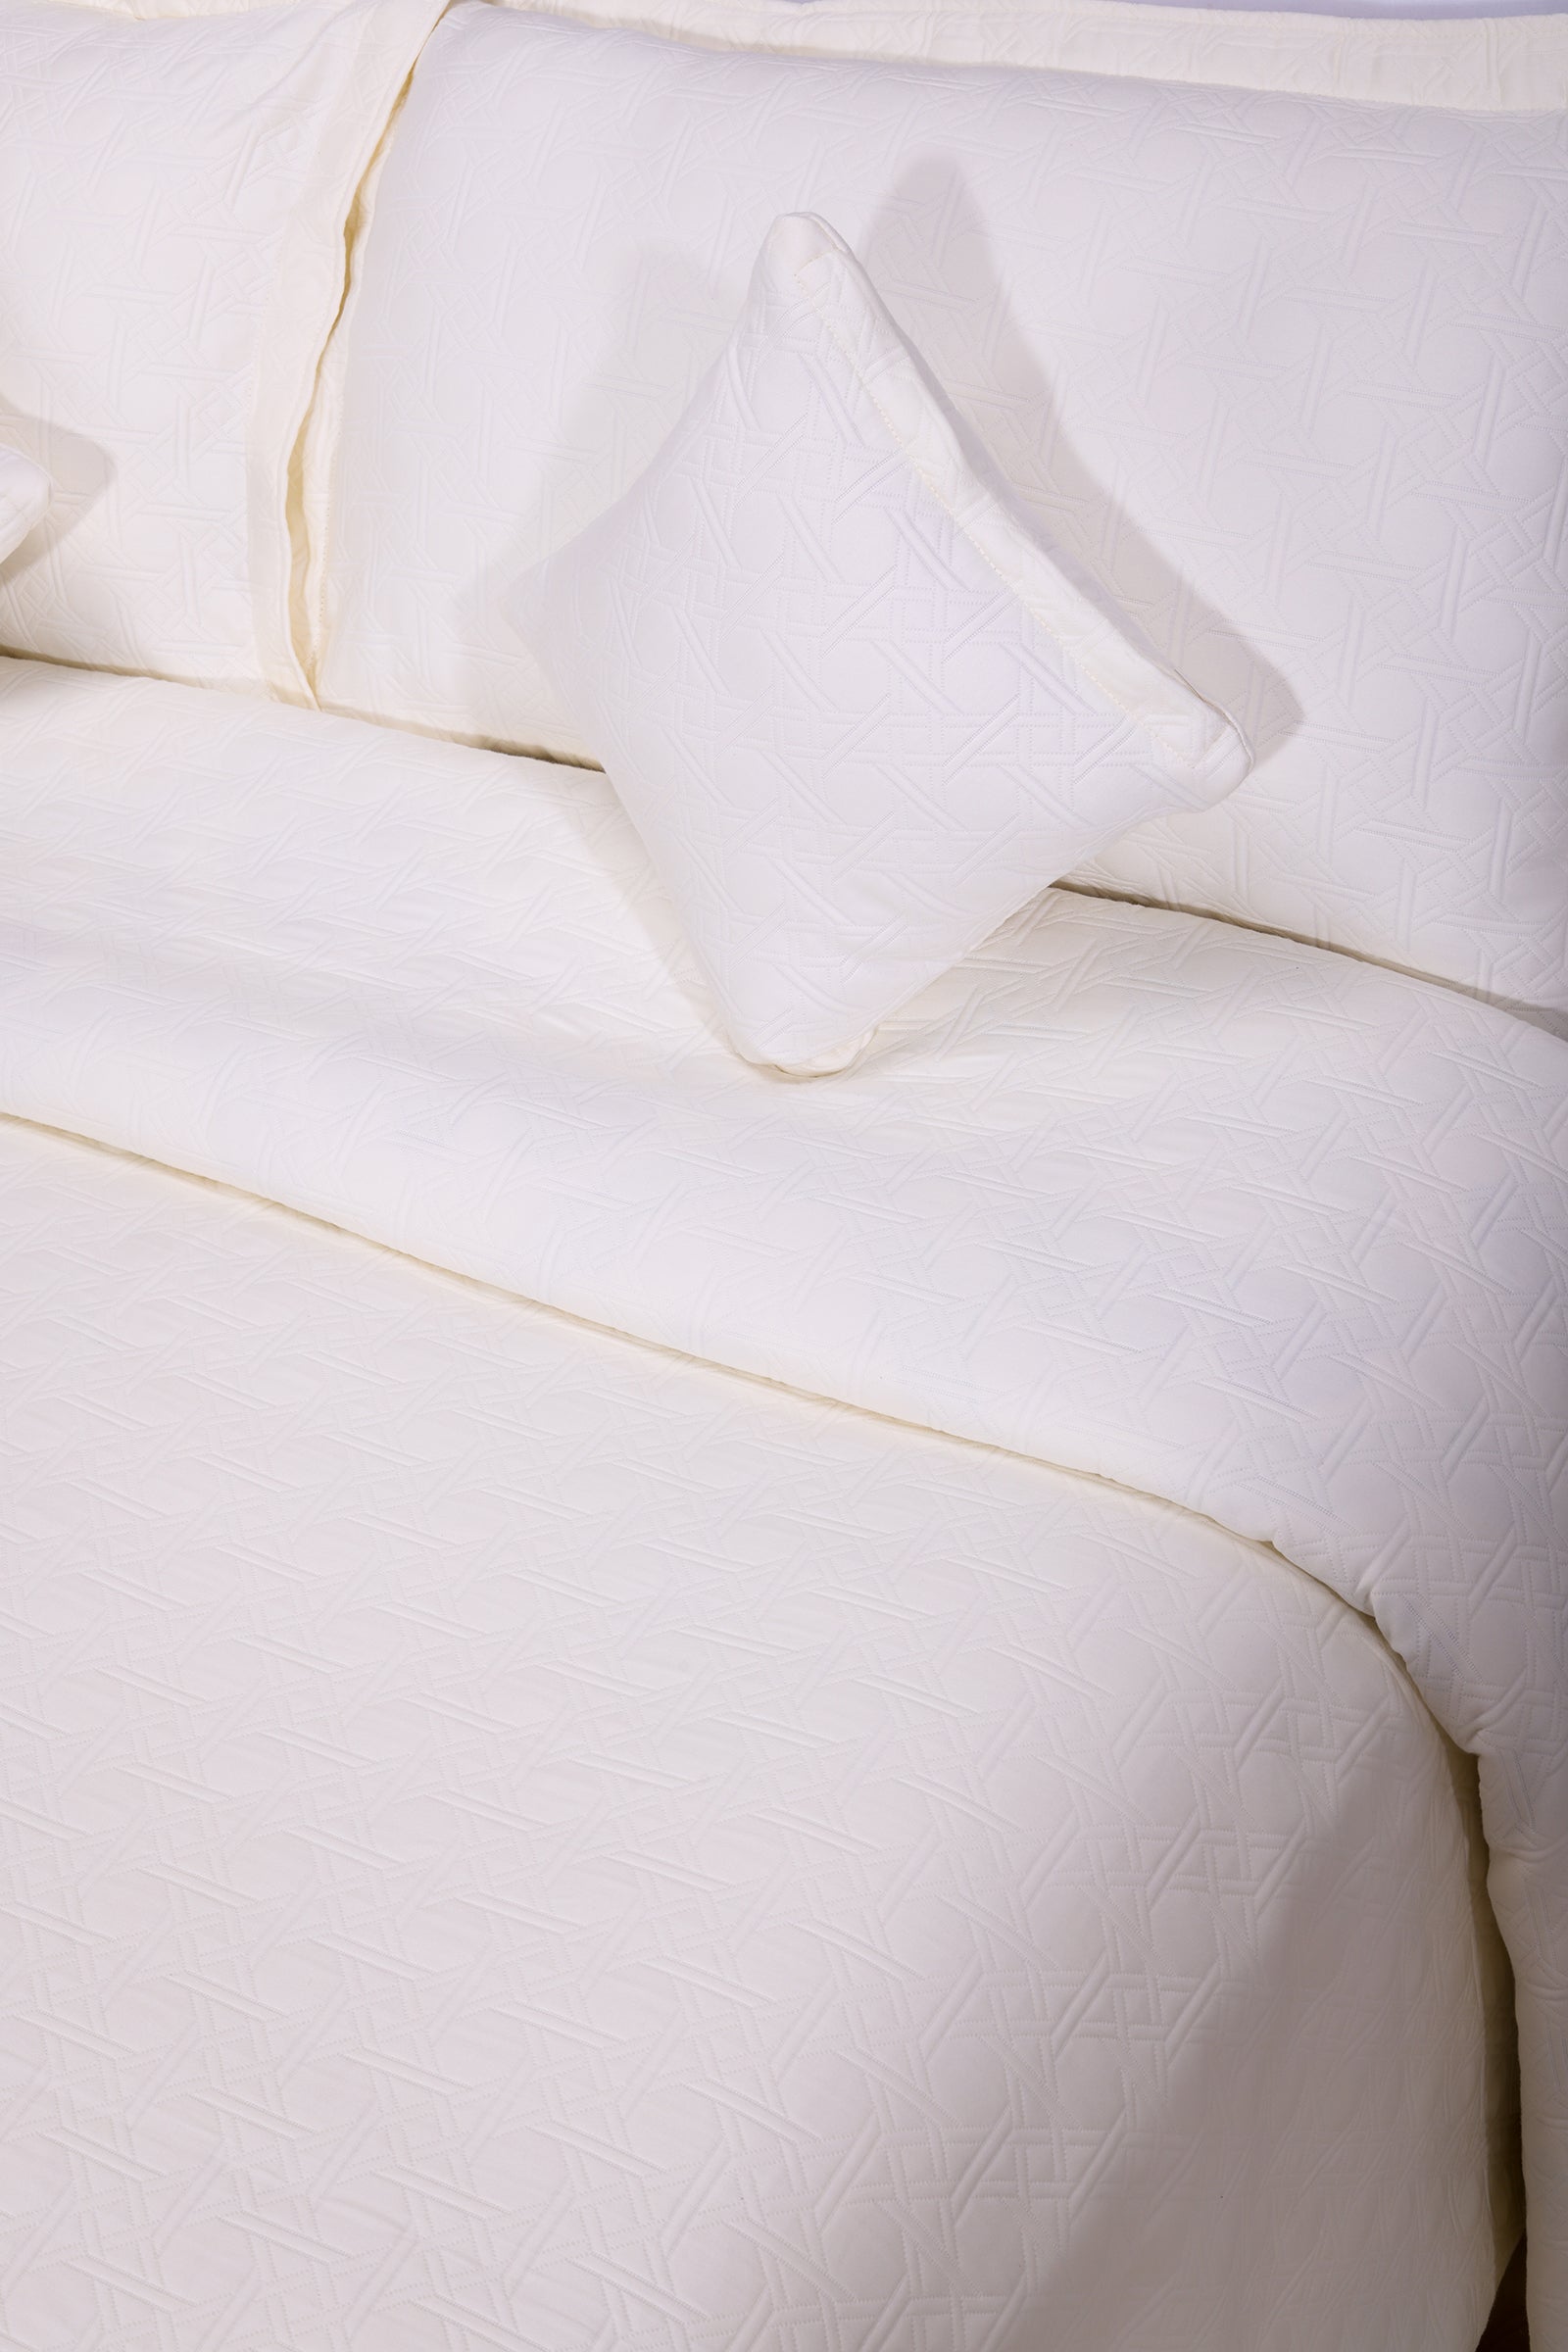 Ring Cotton Offwhite Cotton Bedcover Set of 5 - shahenazindia